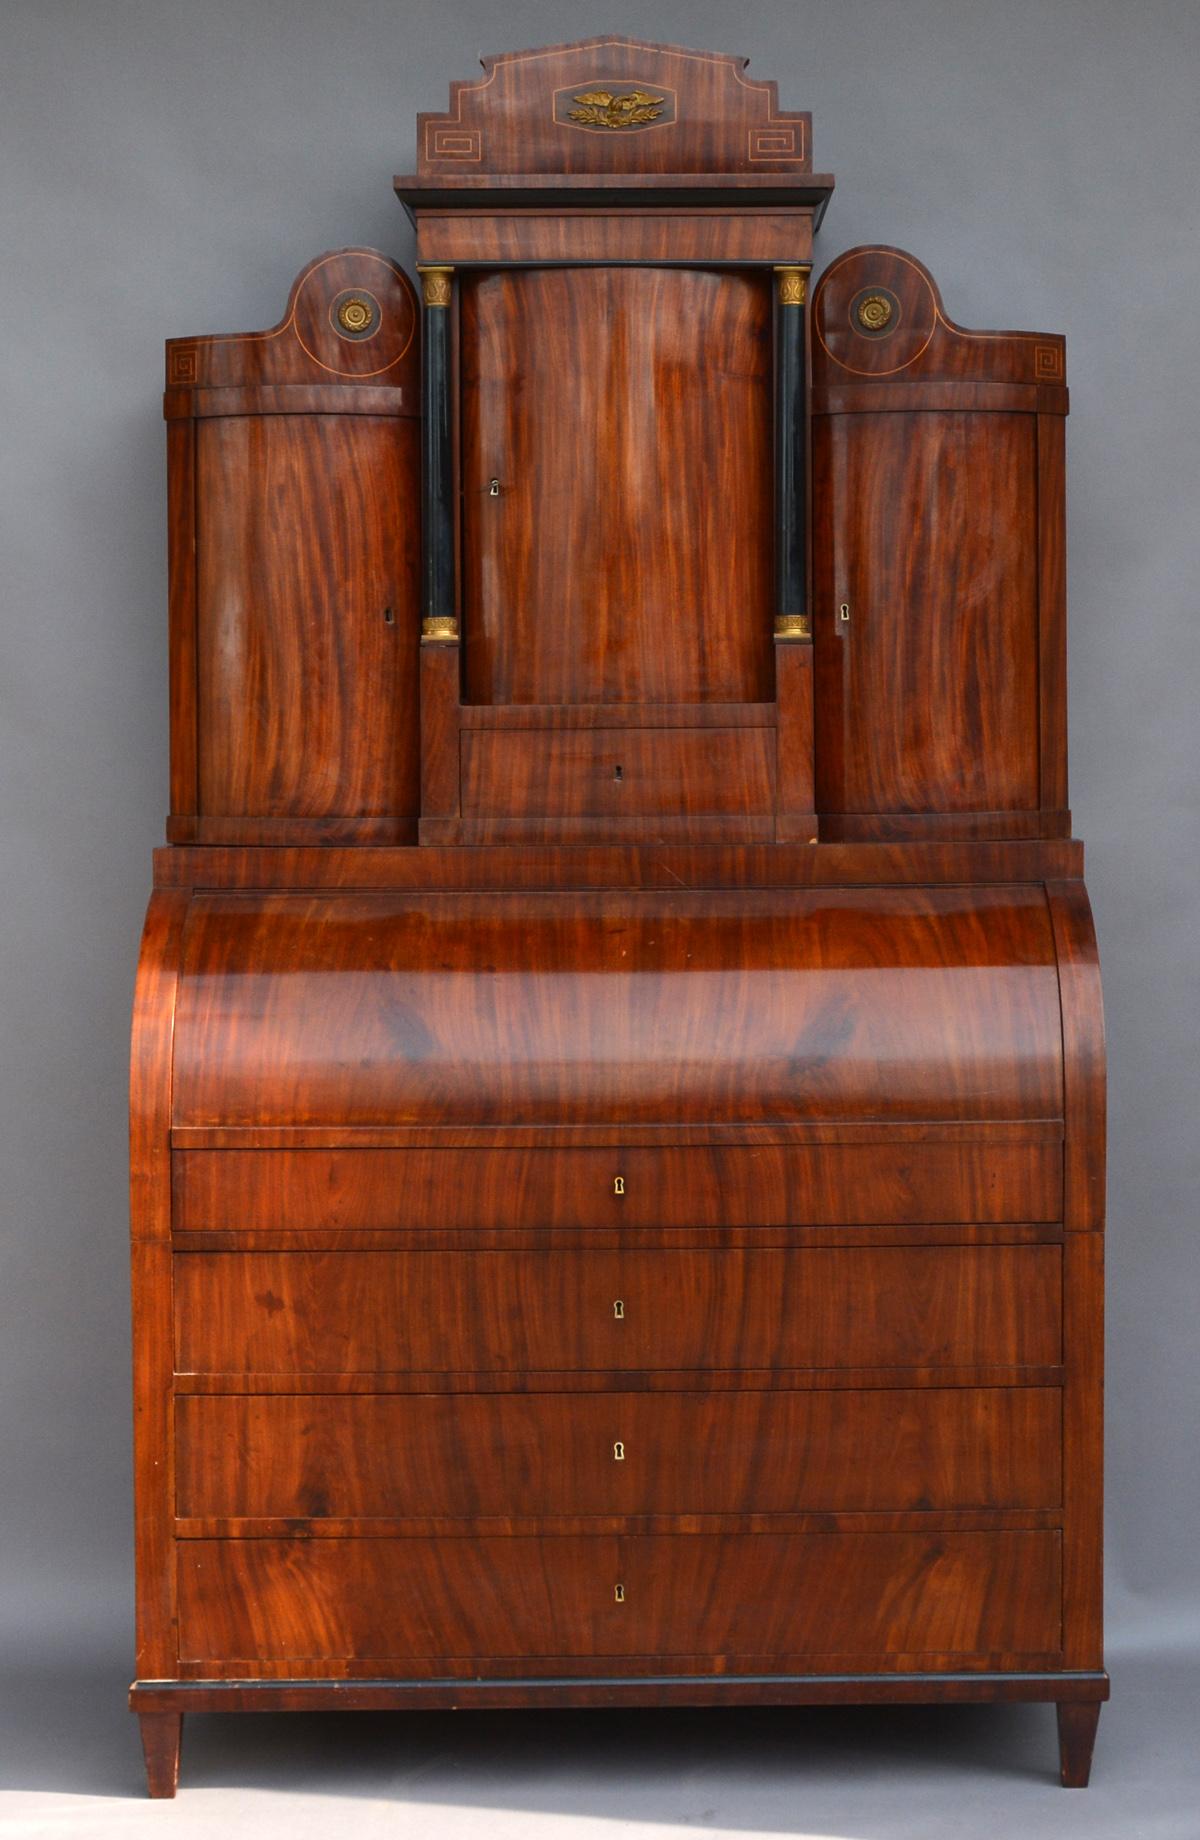 Early 19th Century Empire Secretary from Schleswig, Northern Germany, 1820s